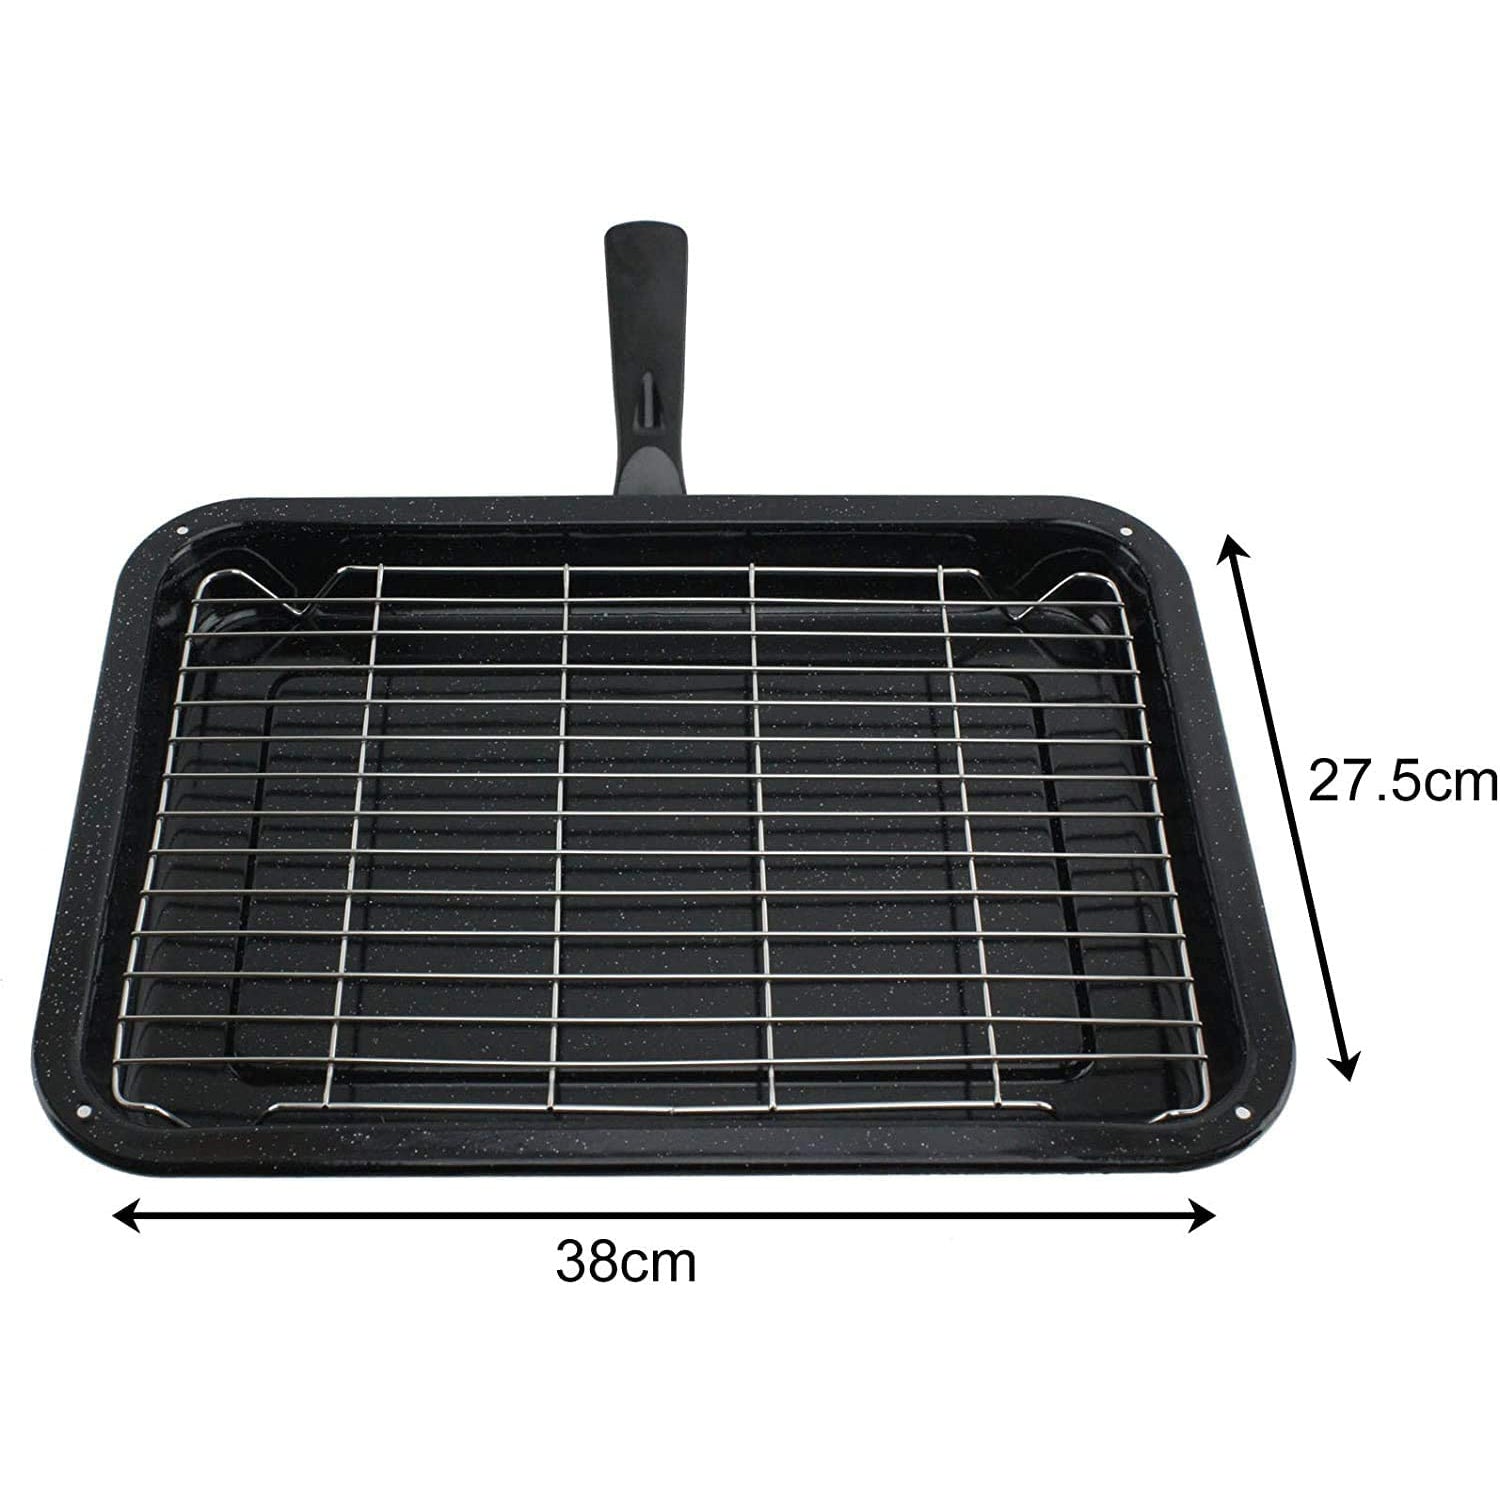 Small Grill Pan + Rack + Detachable Handle for HOTPOINT Oven Cooker